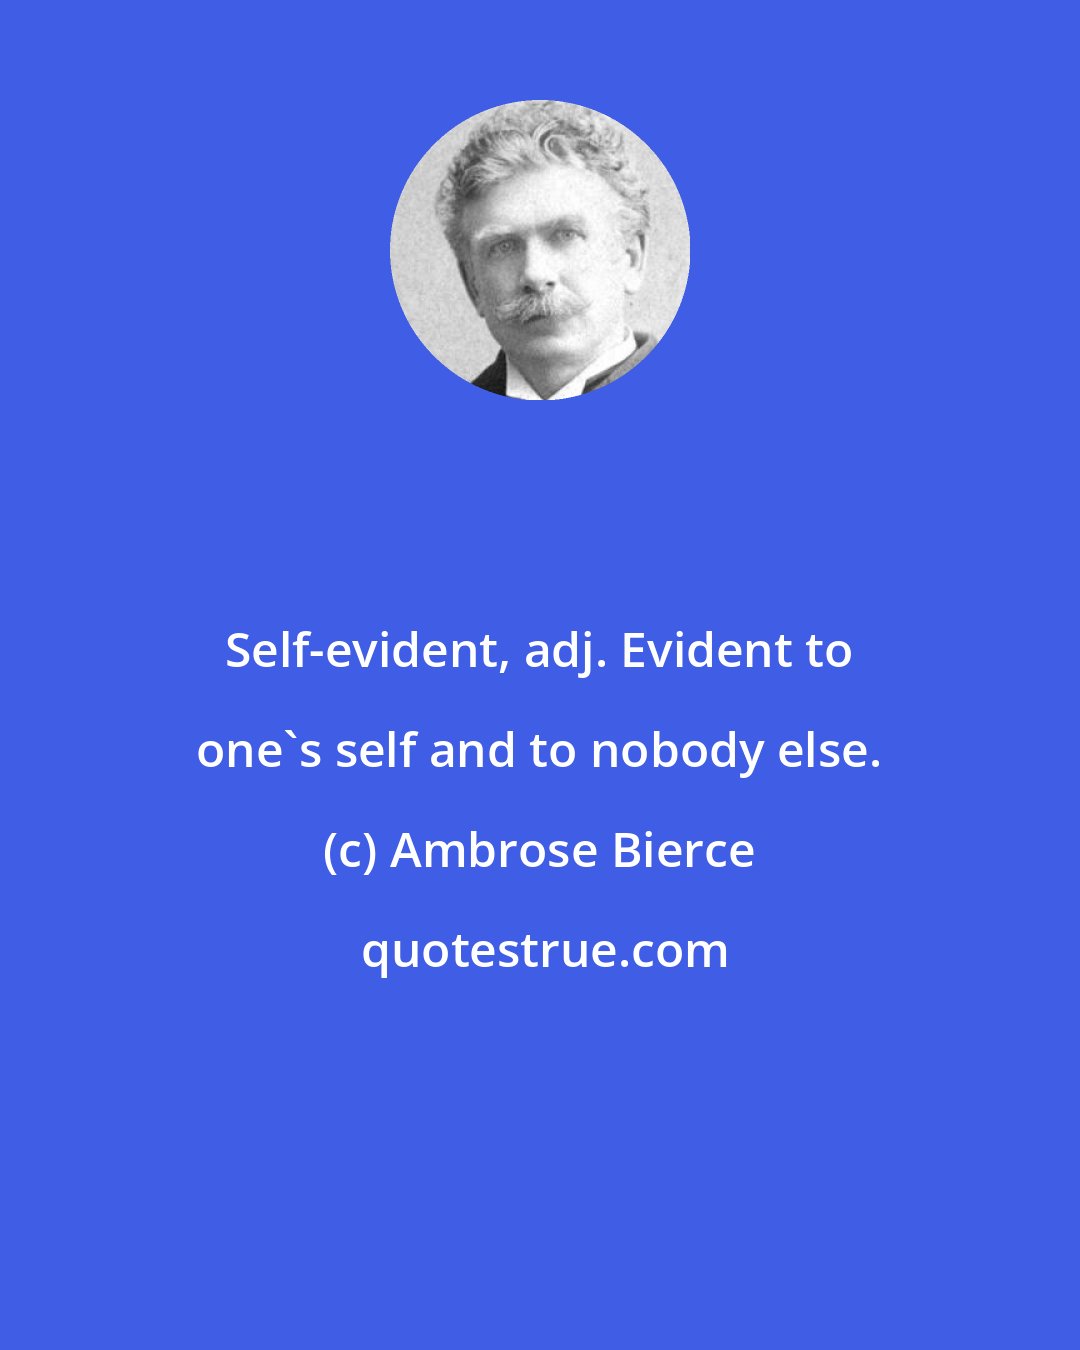 Ambrose Bierce: Self-evident, adj. Evident to one's self and to nobody else.